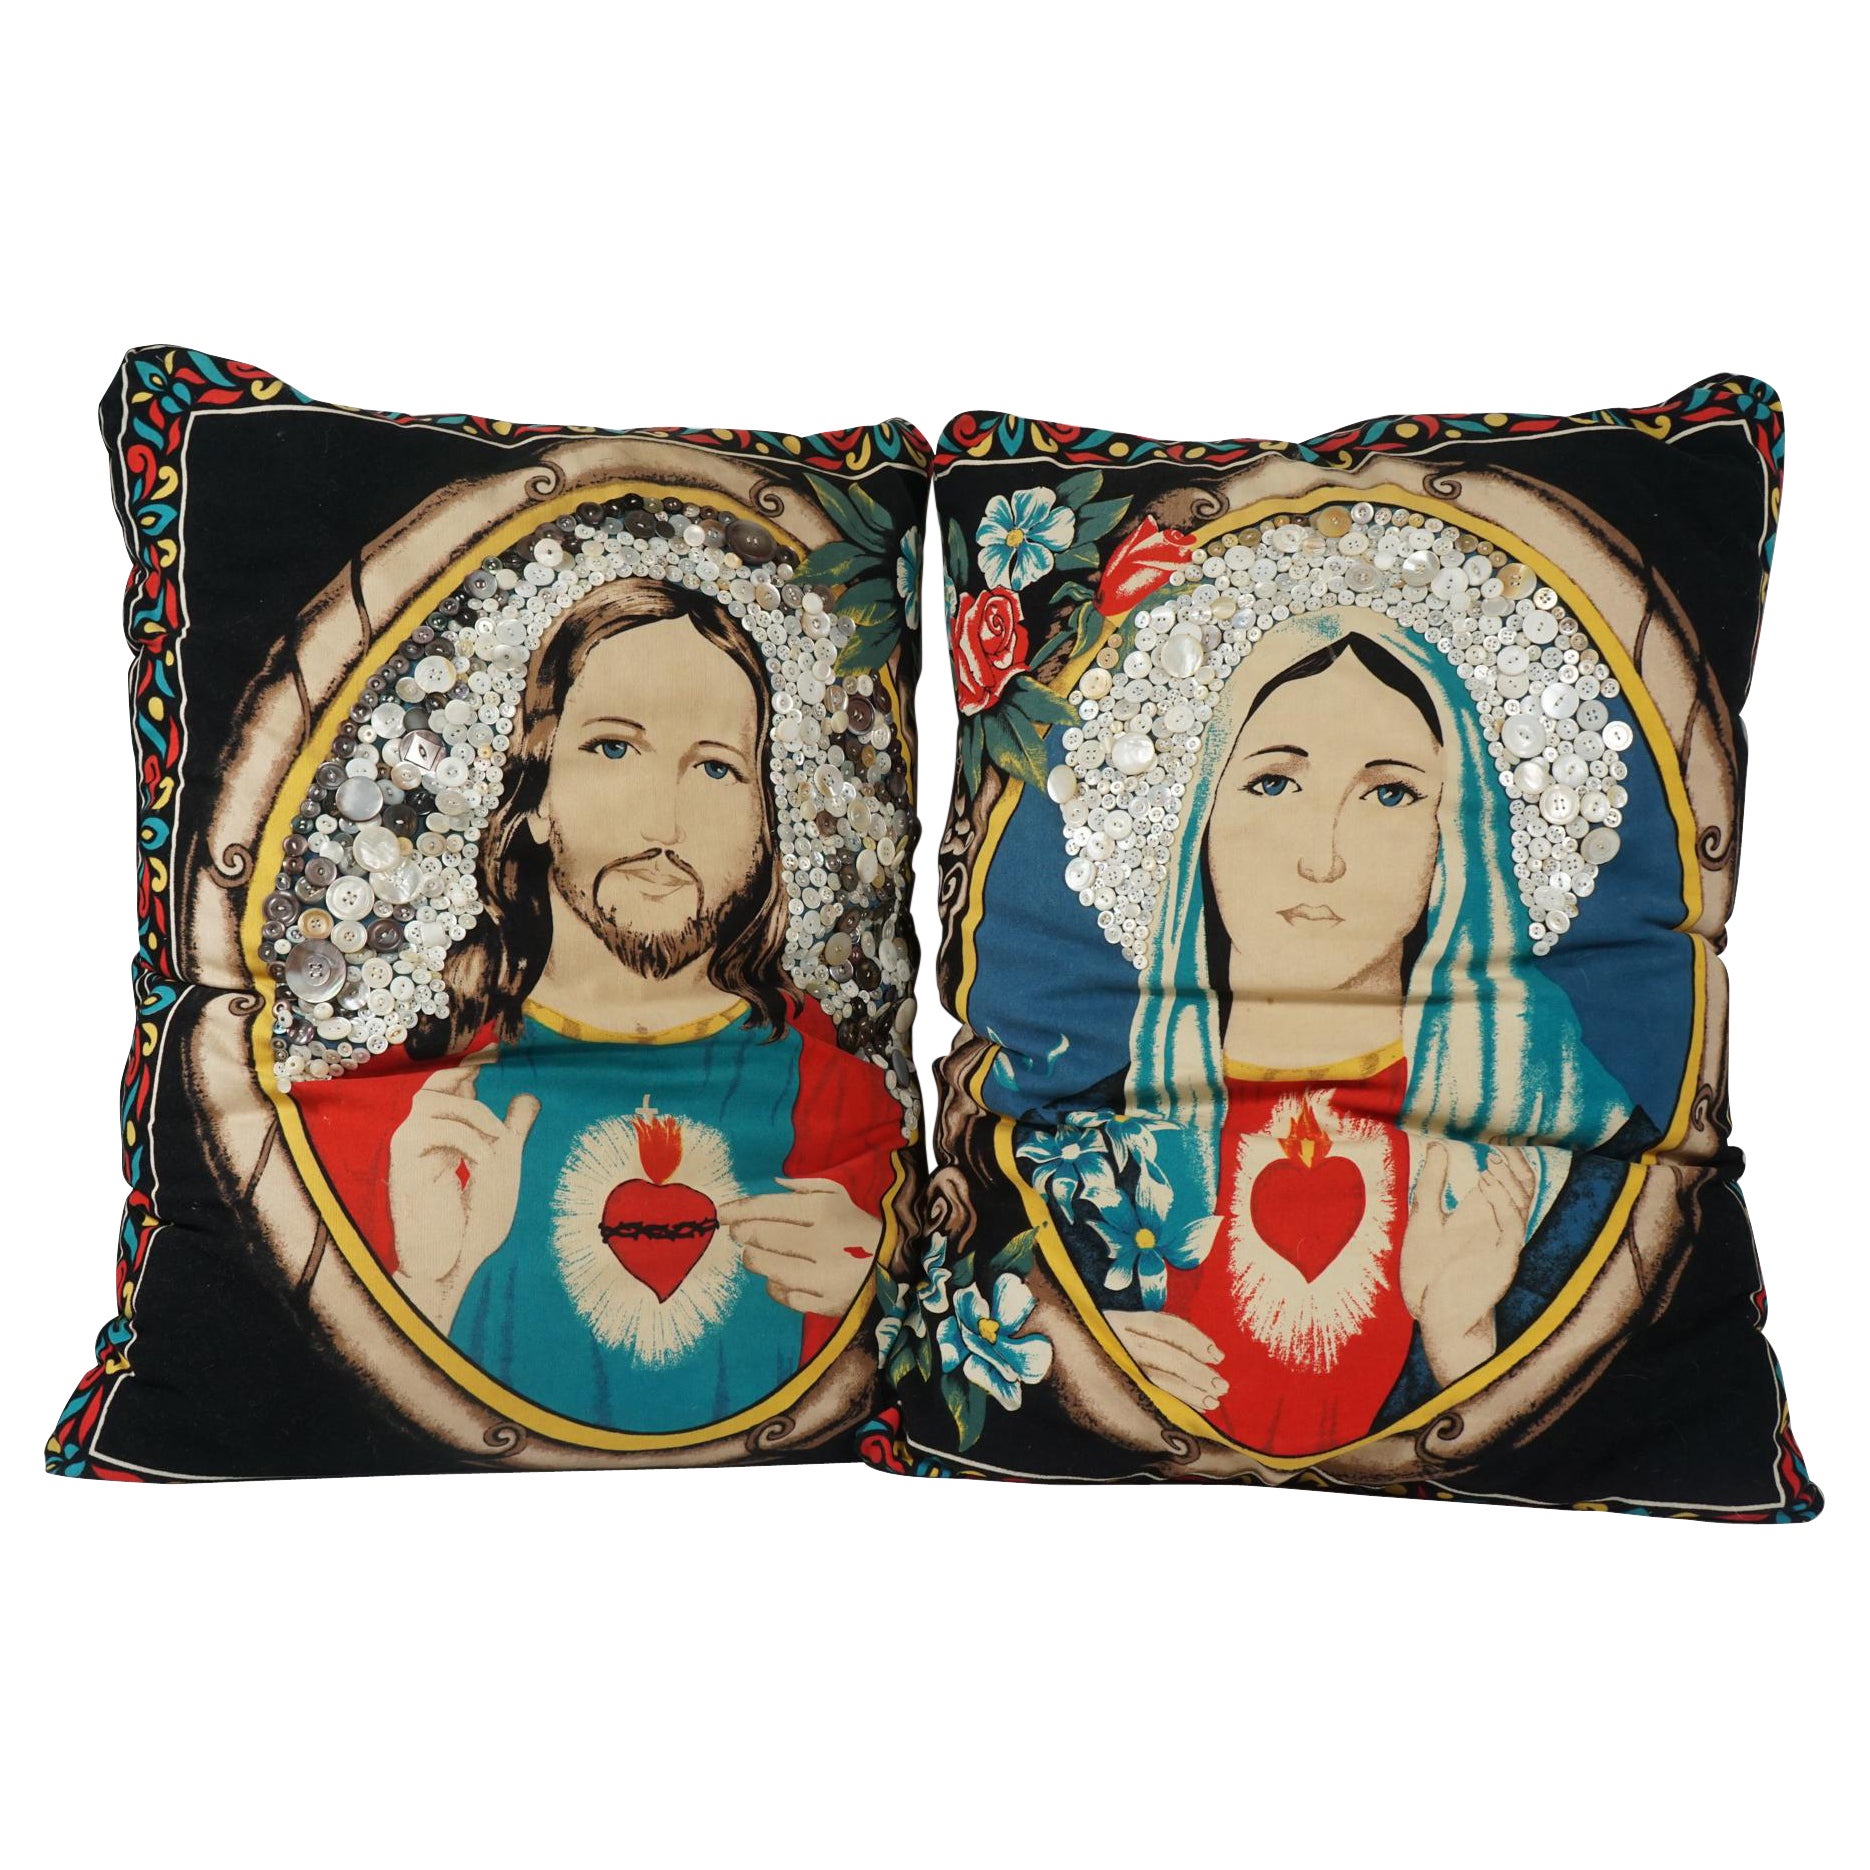 20th Century Pair of Decorated Pillows by Dan Rupe